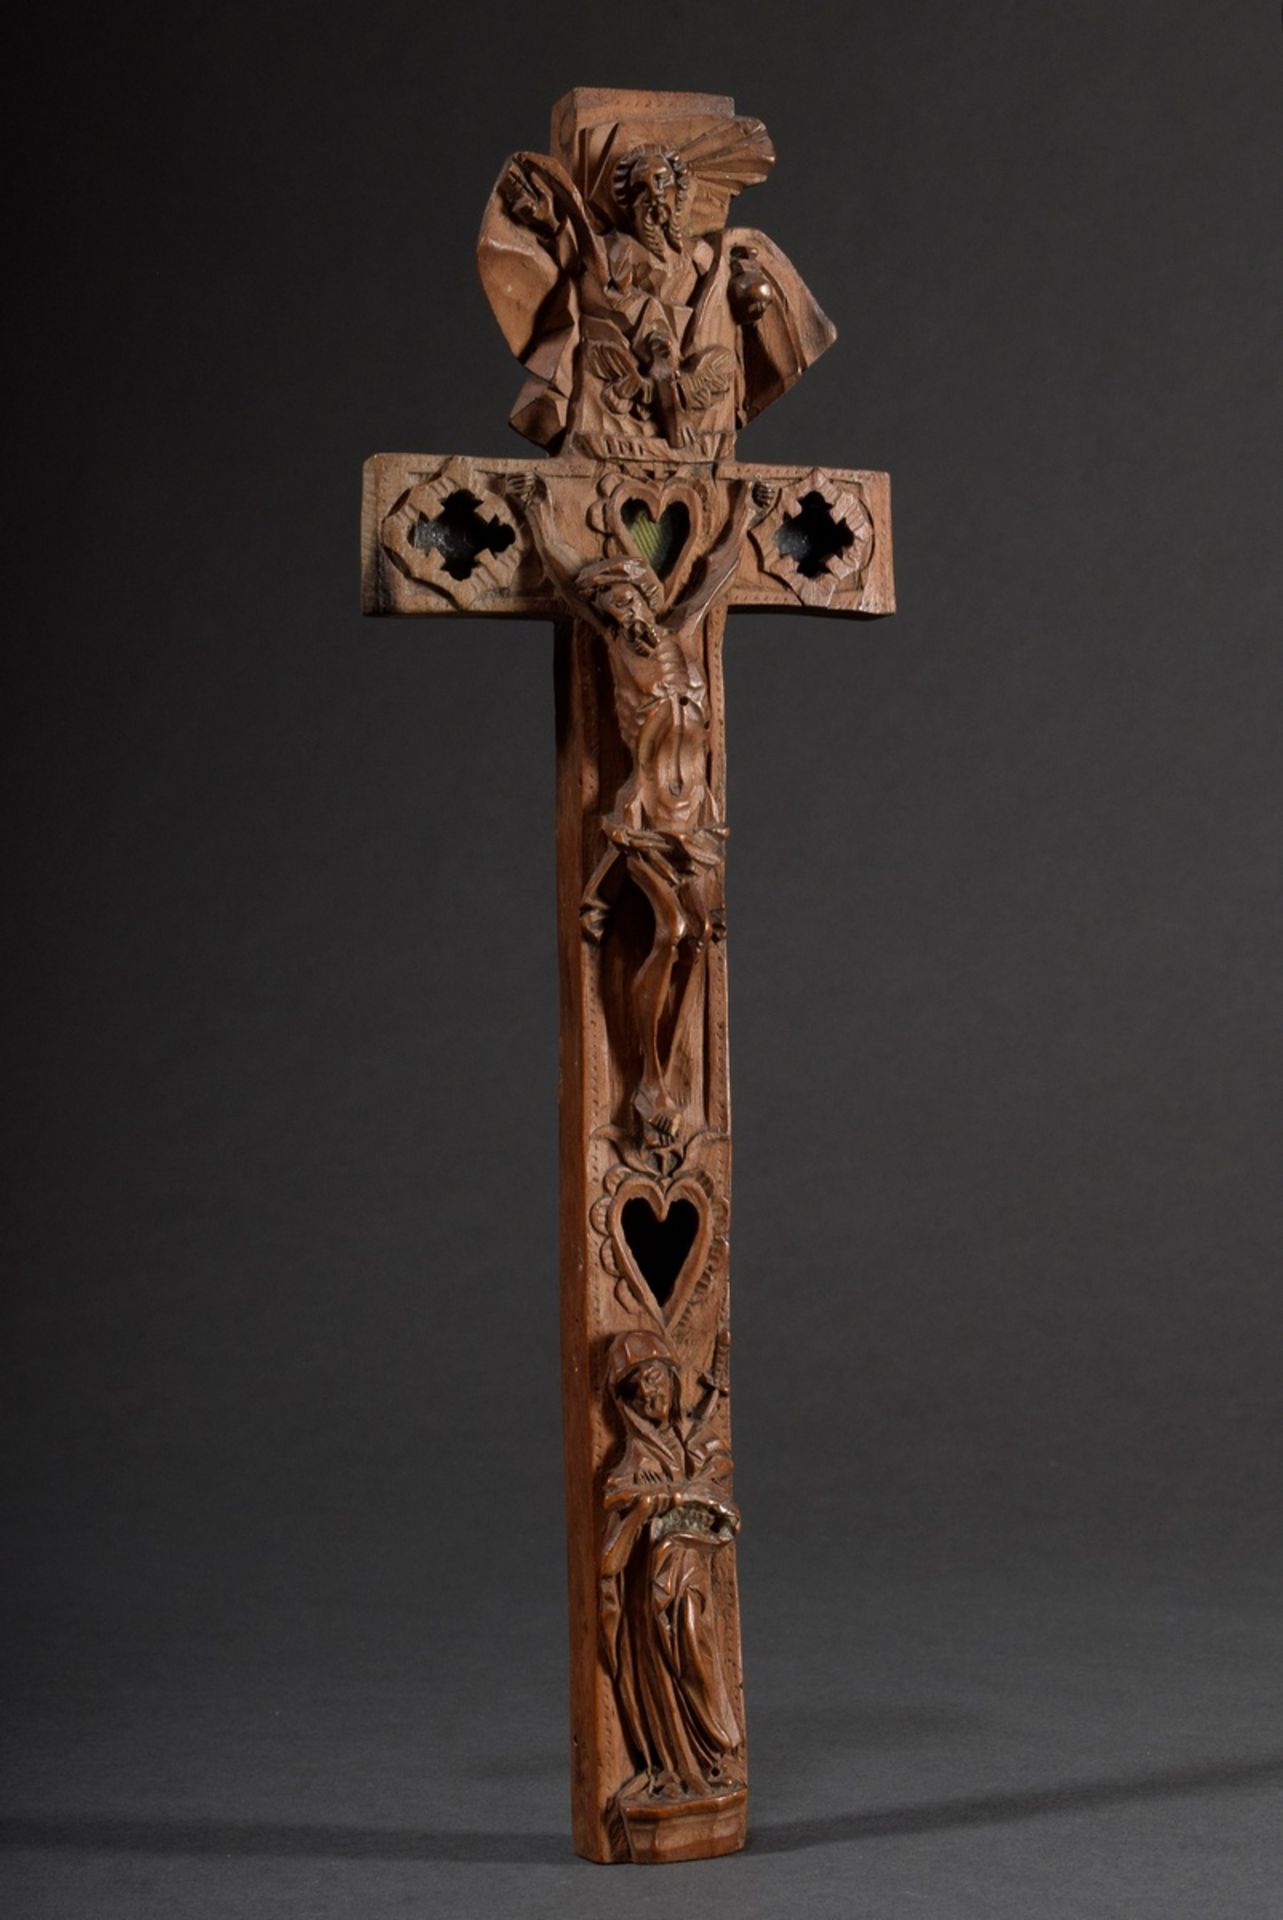 Carved reliquary cross depicting "Christ on the cross", "Mary" and "God the Father", on the reverse